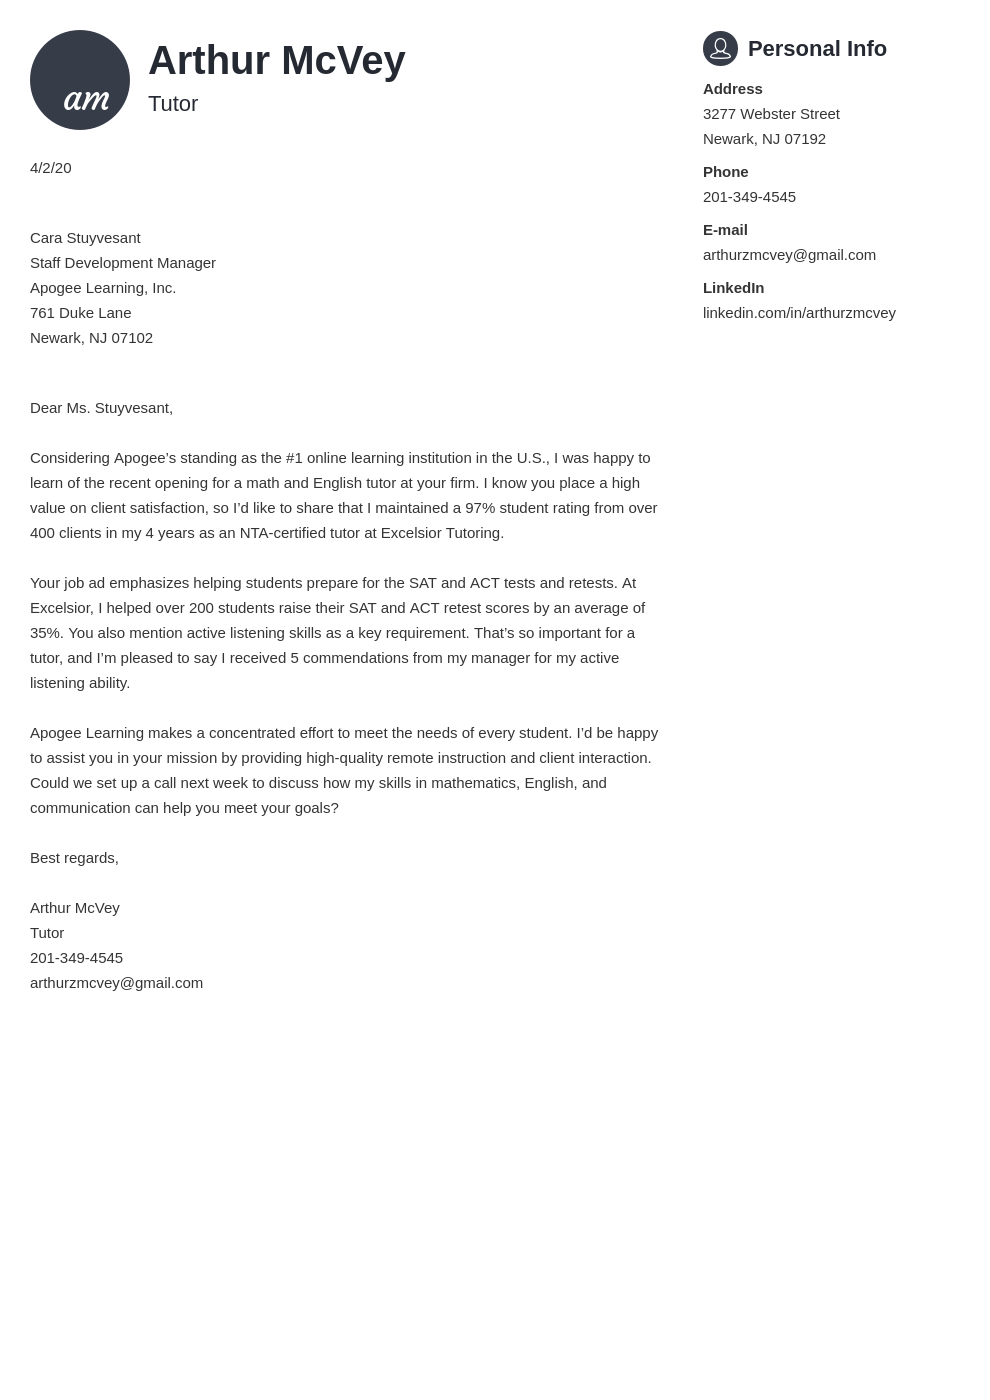 how to write a formal cover letter for job application